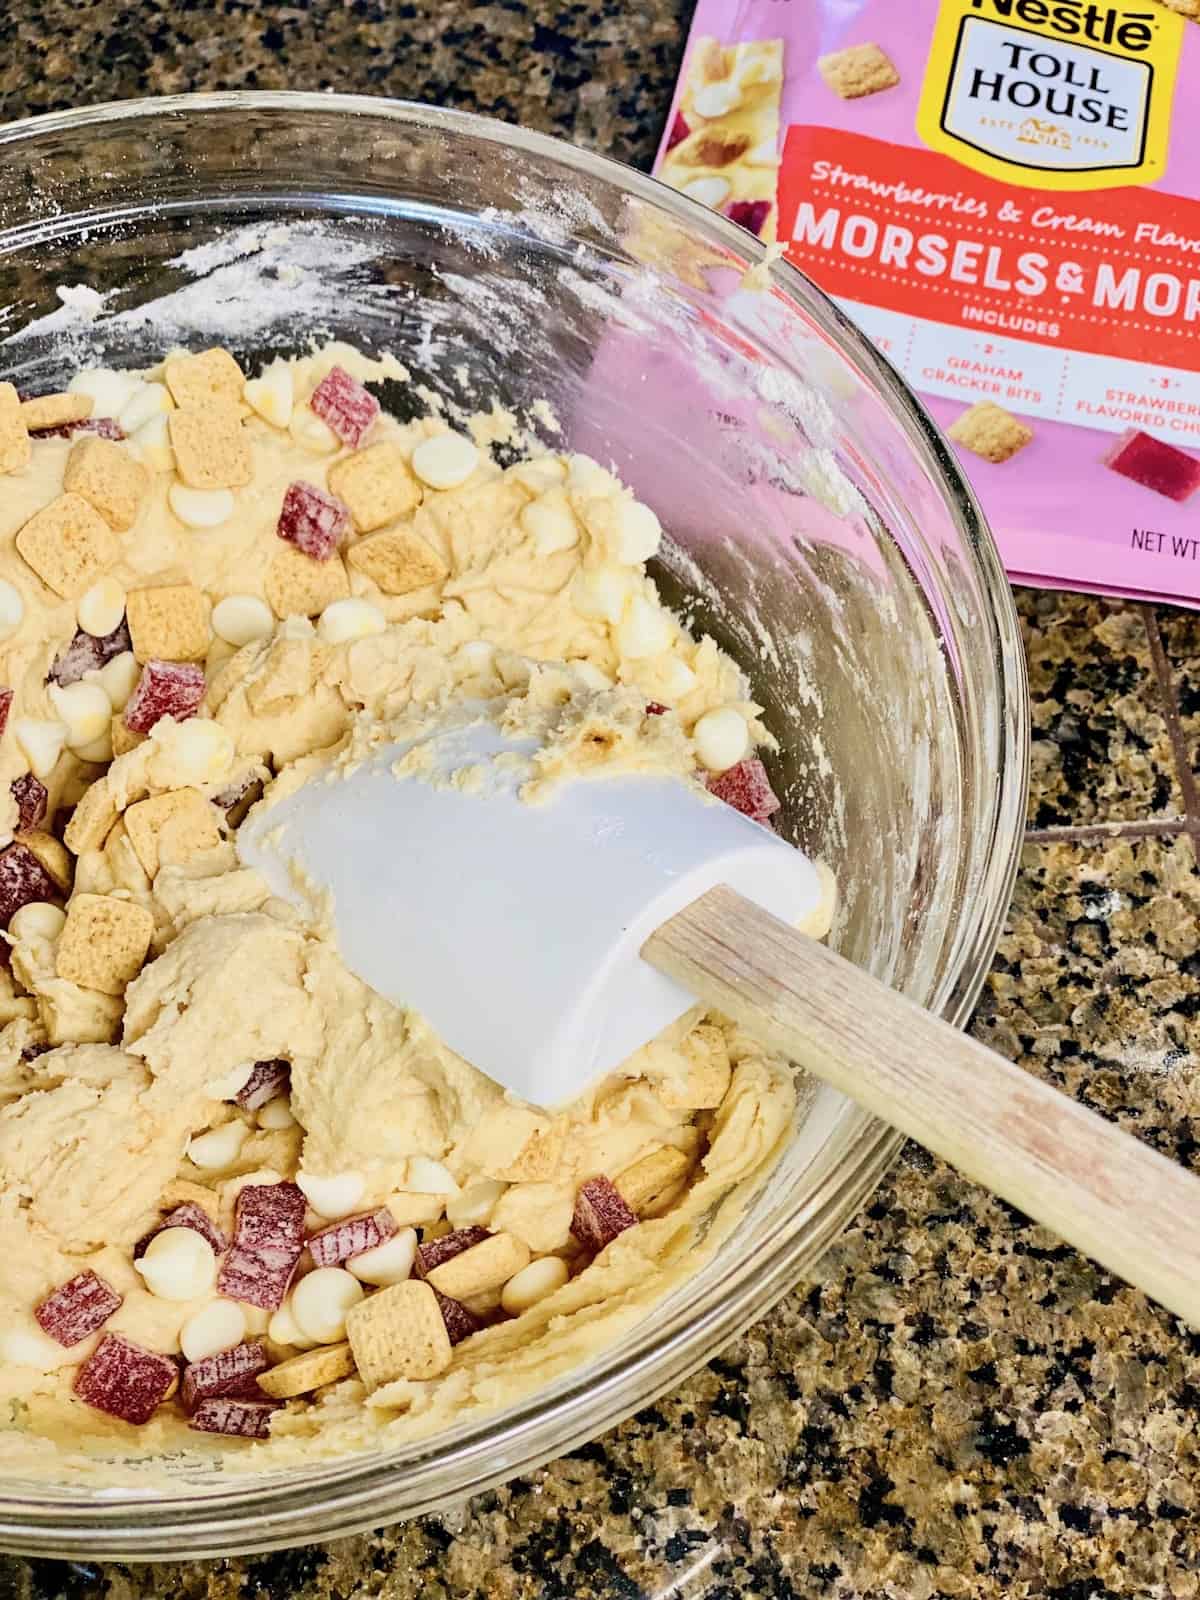 Bowl with the cookie dough ready and the Morsels and more strawberries and cream pieces being stirred in.